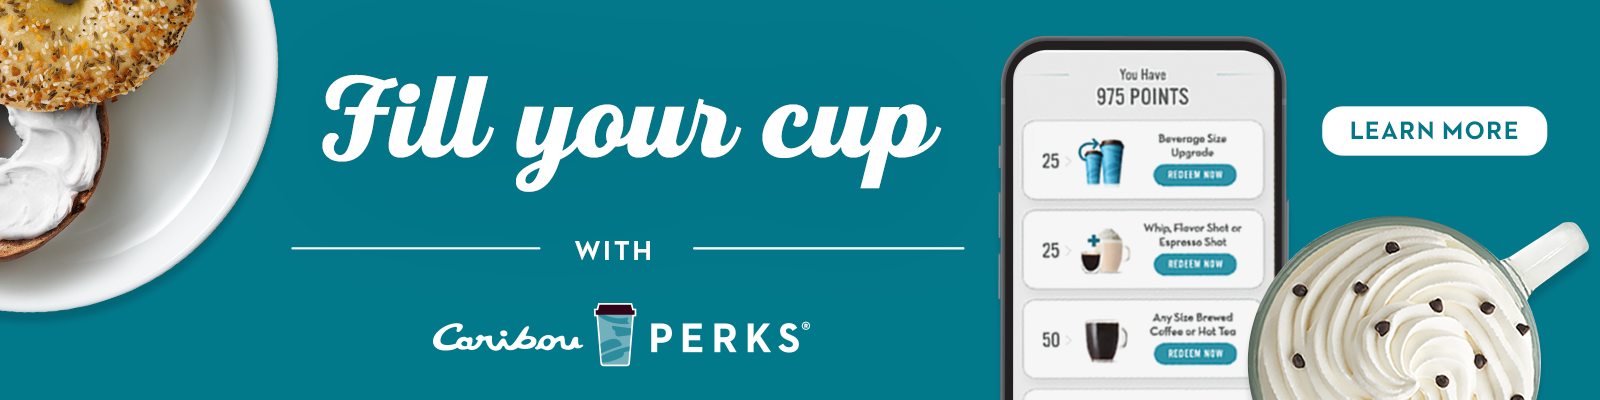 Fill your cup with Caribou Perks loyalty program.